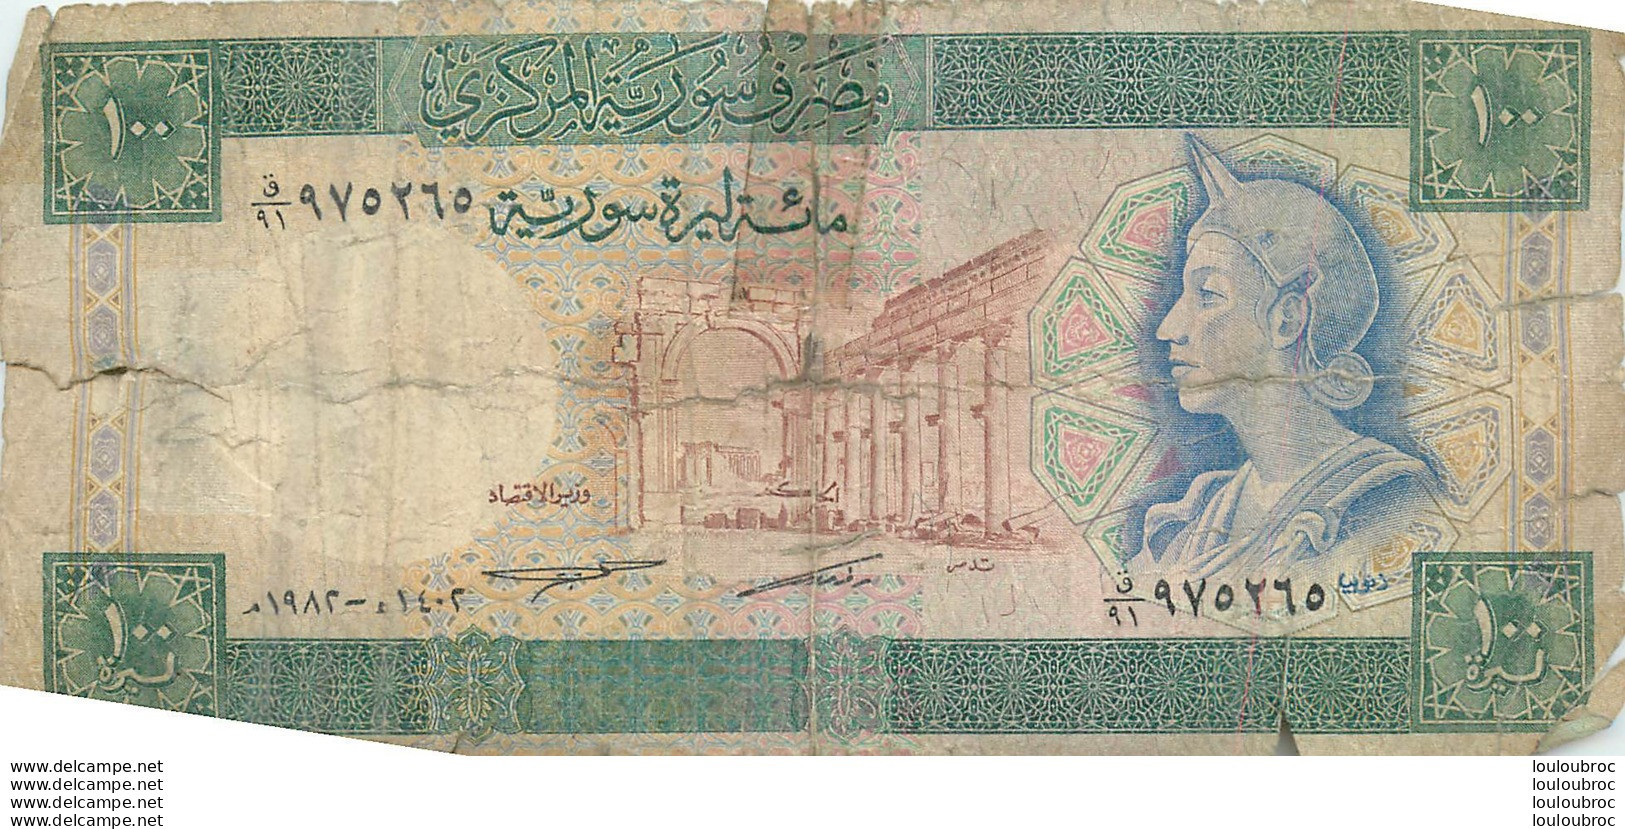 BILLET   SYRIE 100 ONE HUNDRED SYRIAN POUNDS - Syrien